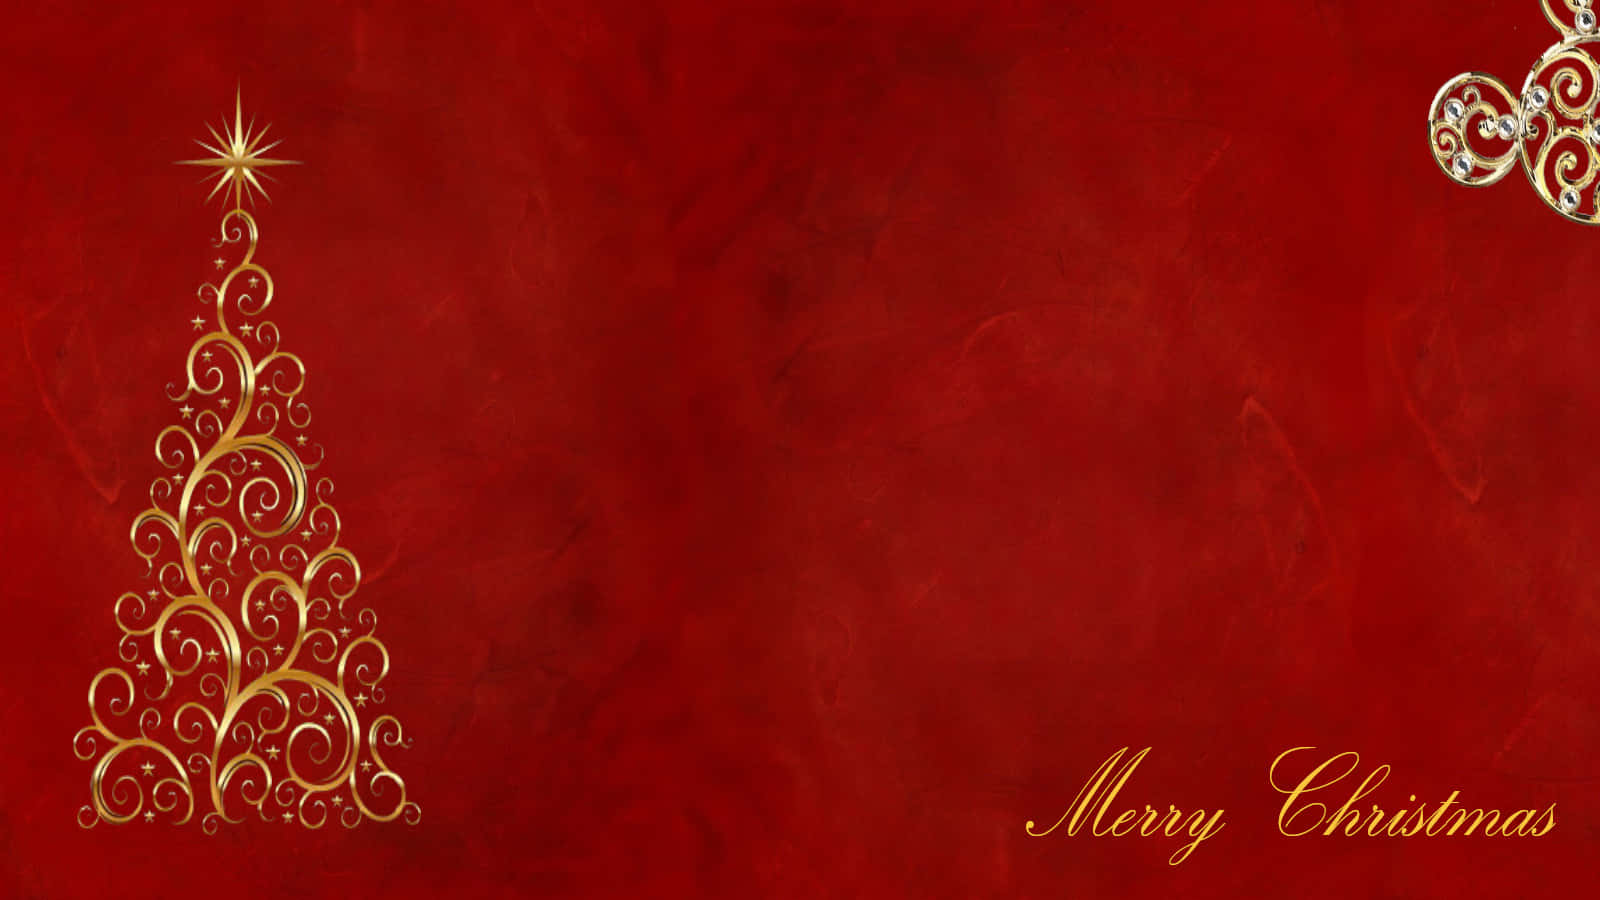 Festive Red Christmas Background